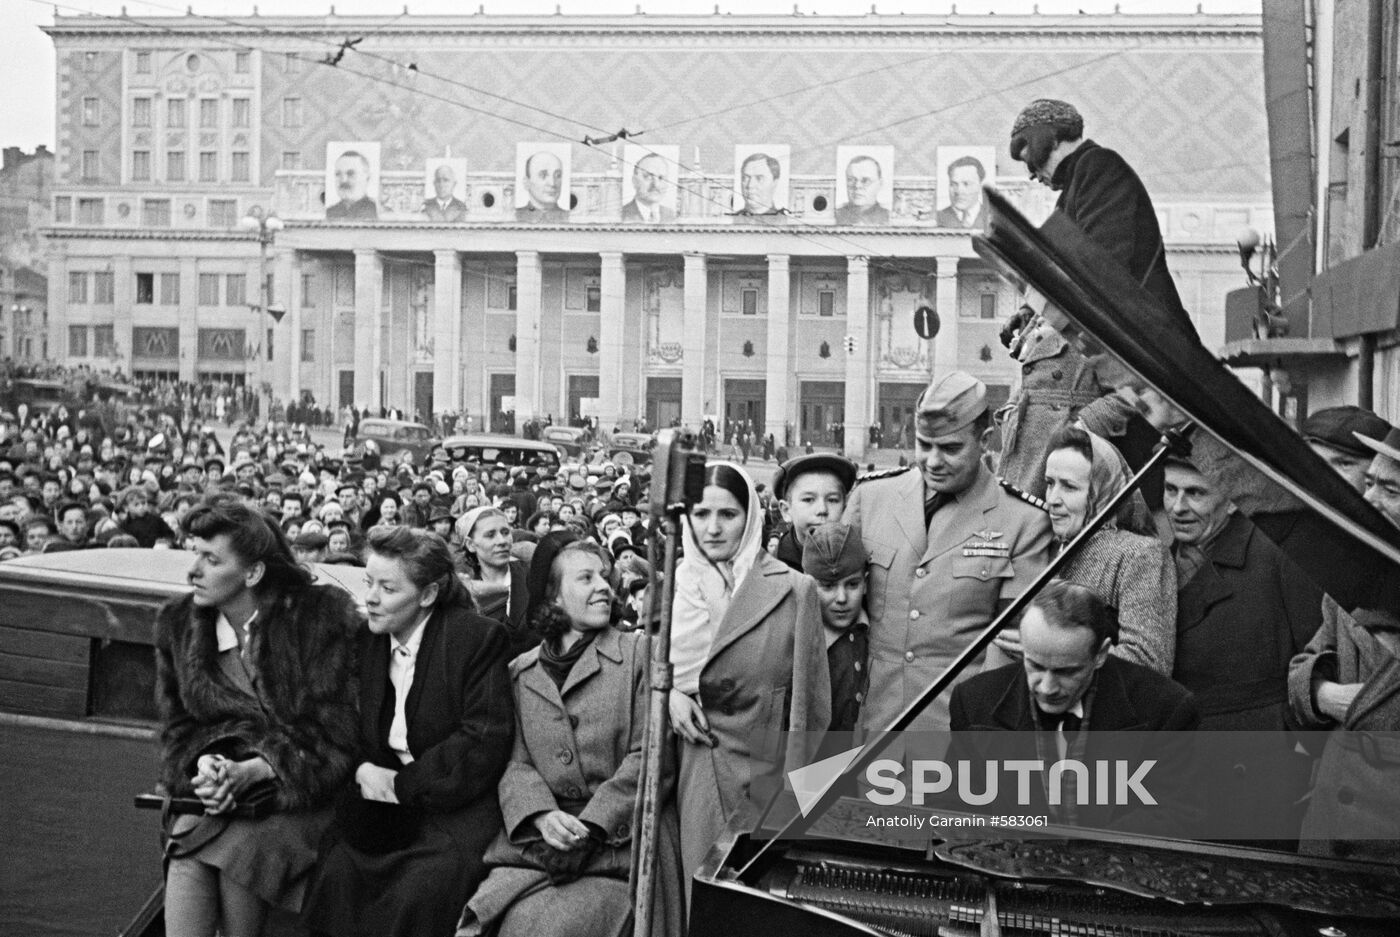 May 9, 1945 in Moscow